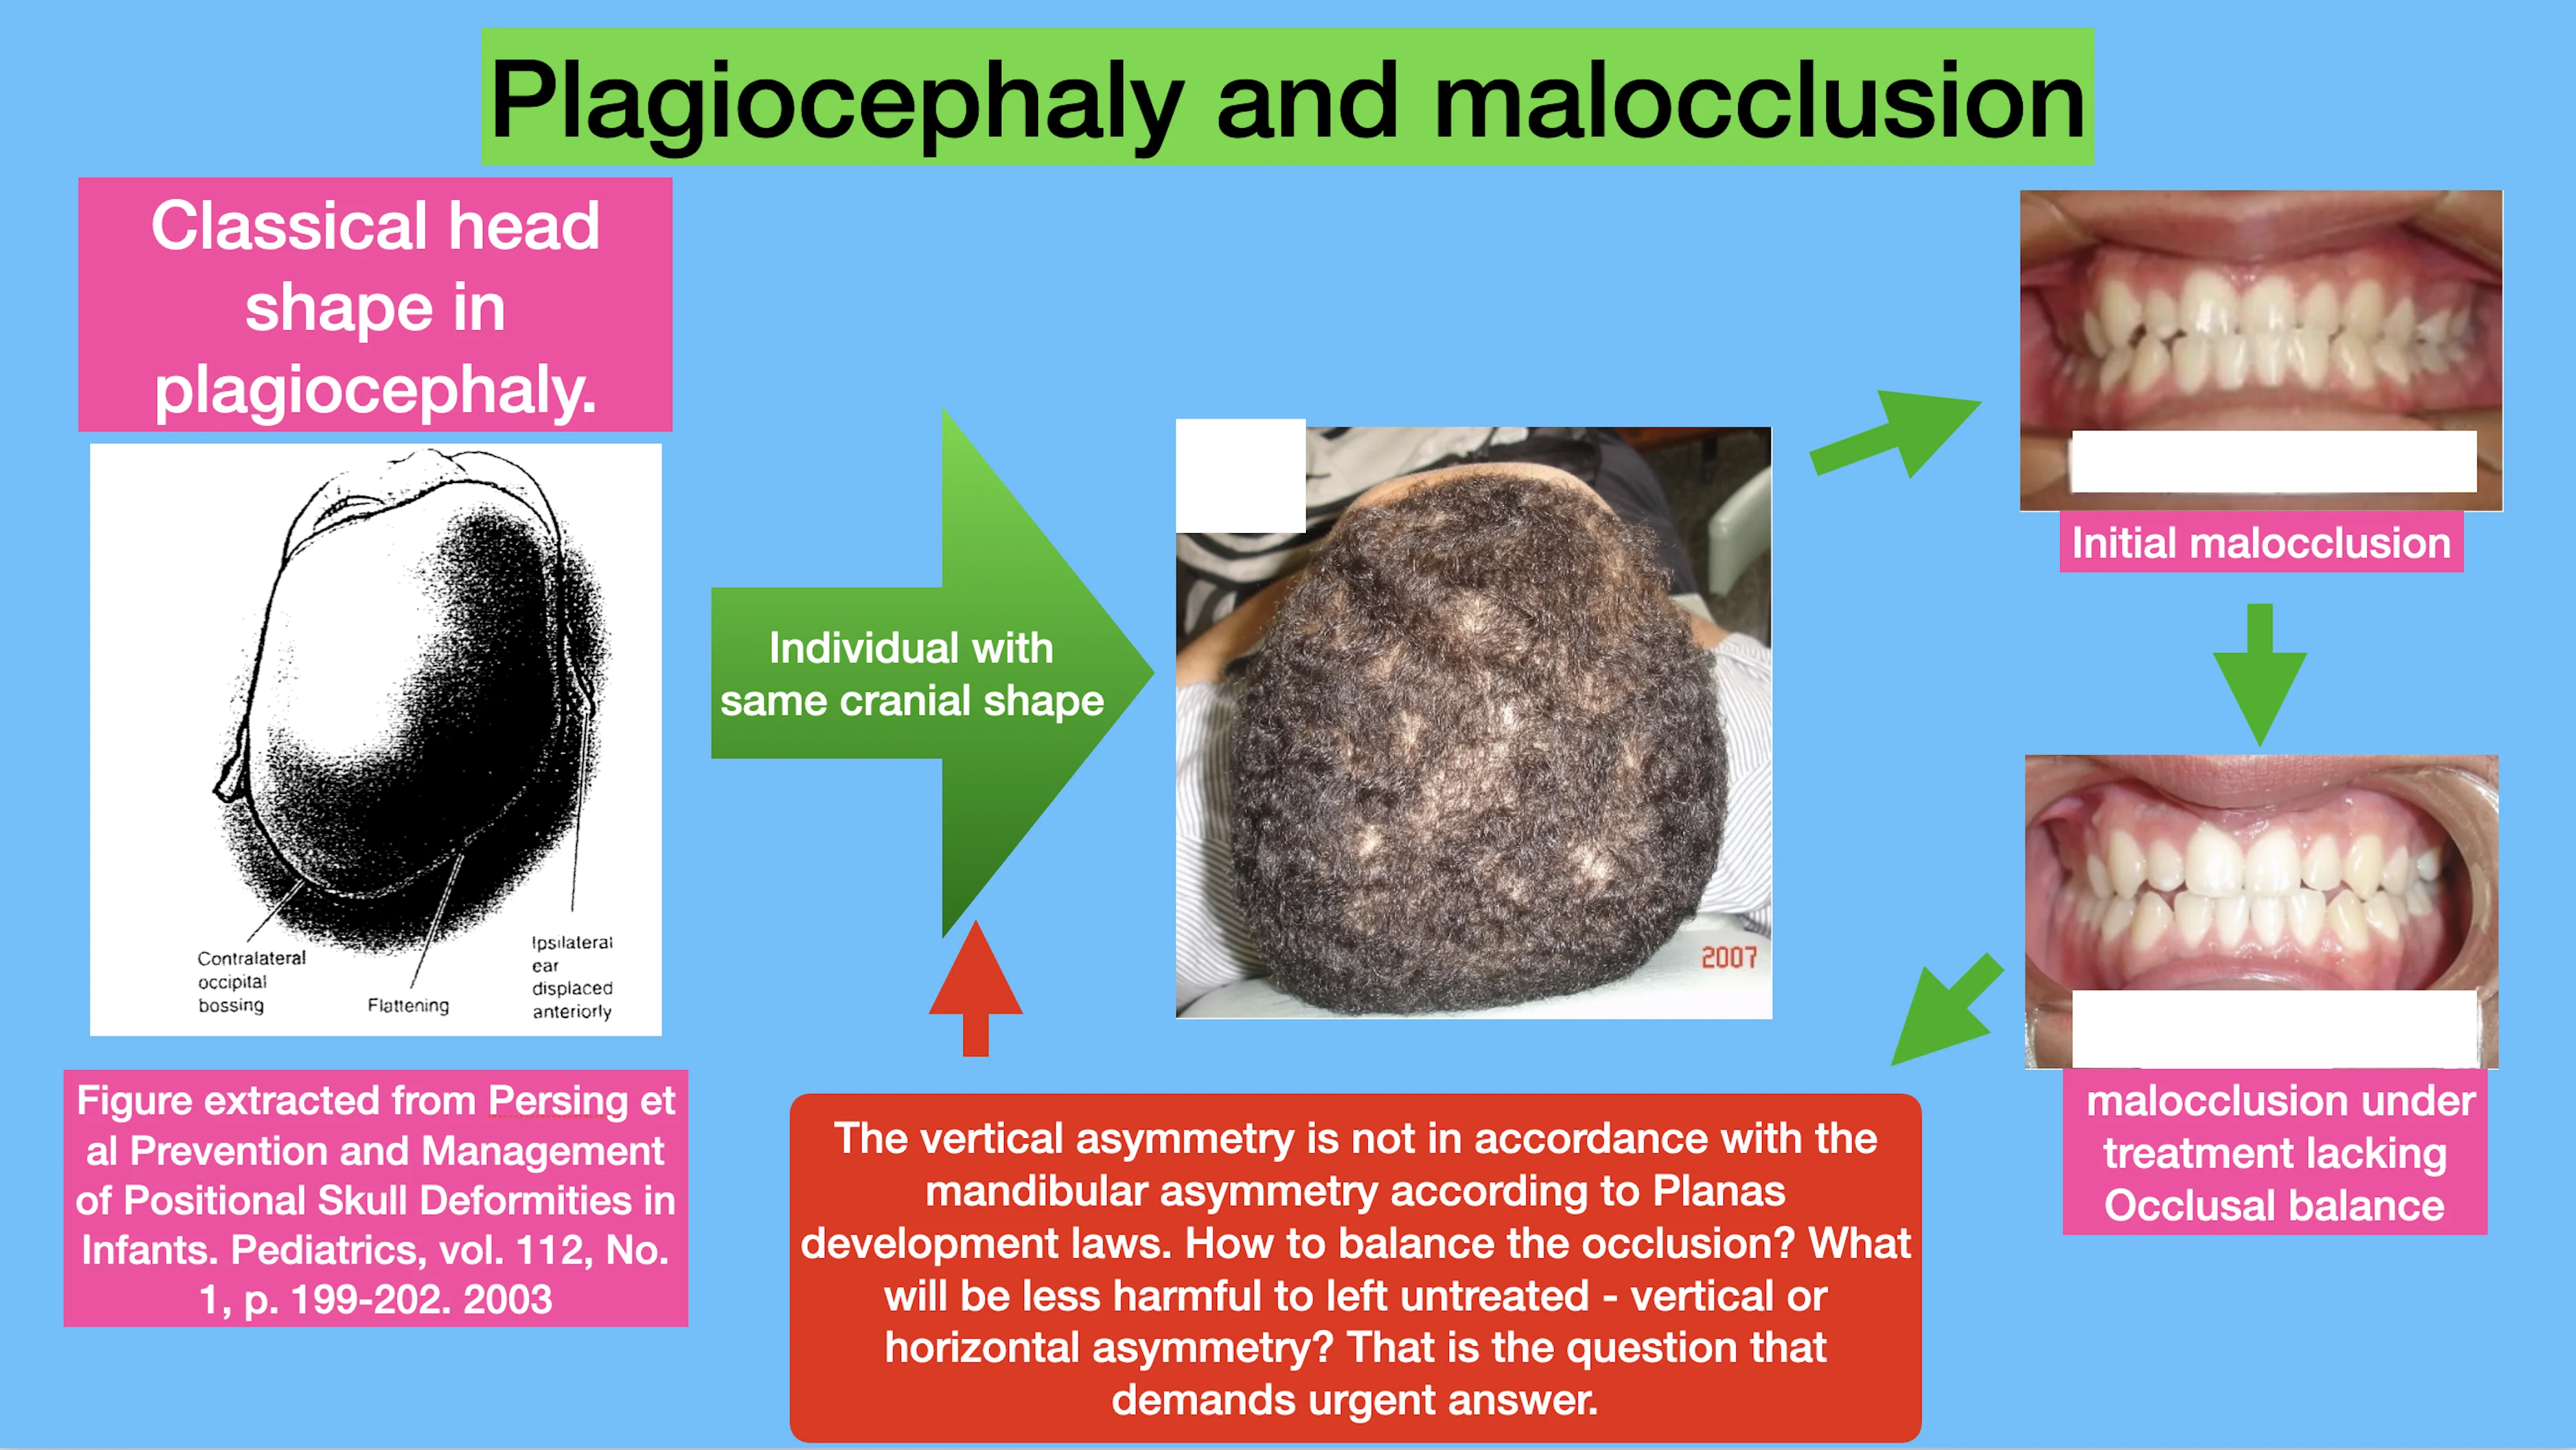 Plagiocephaly and malocclusion